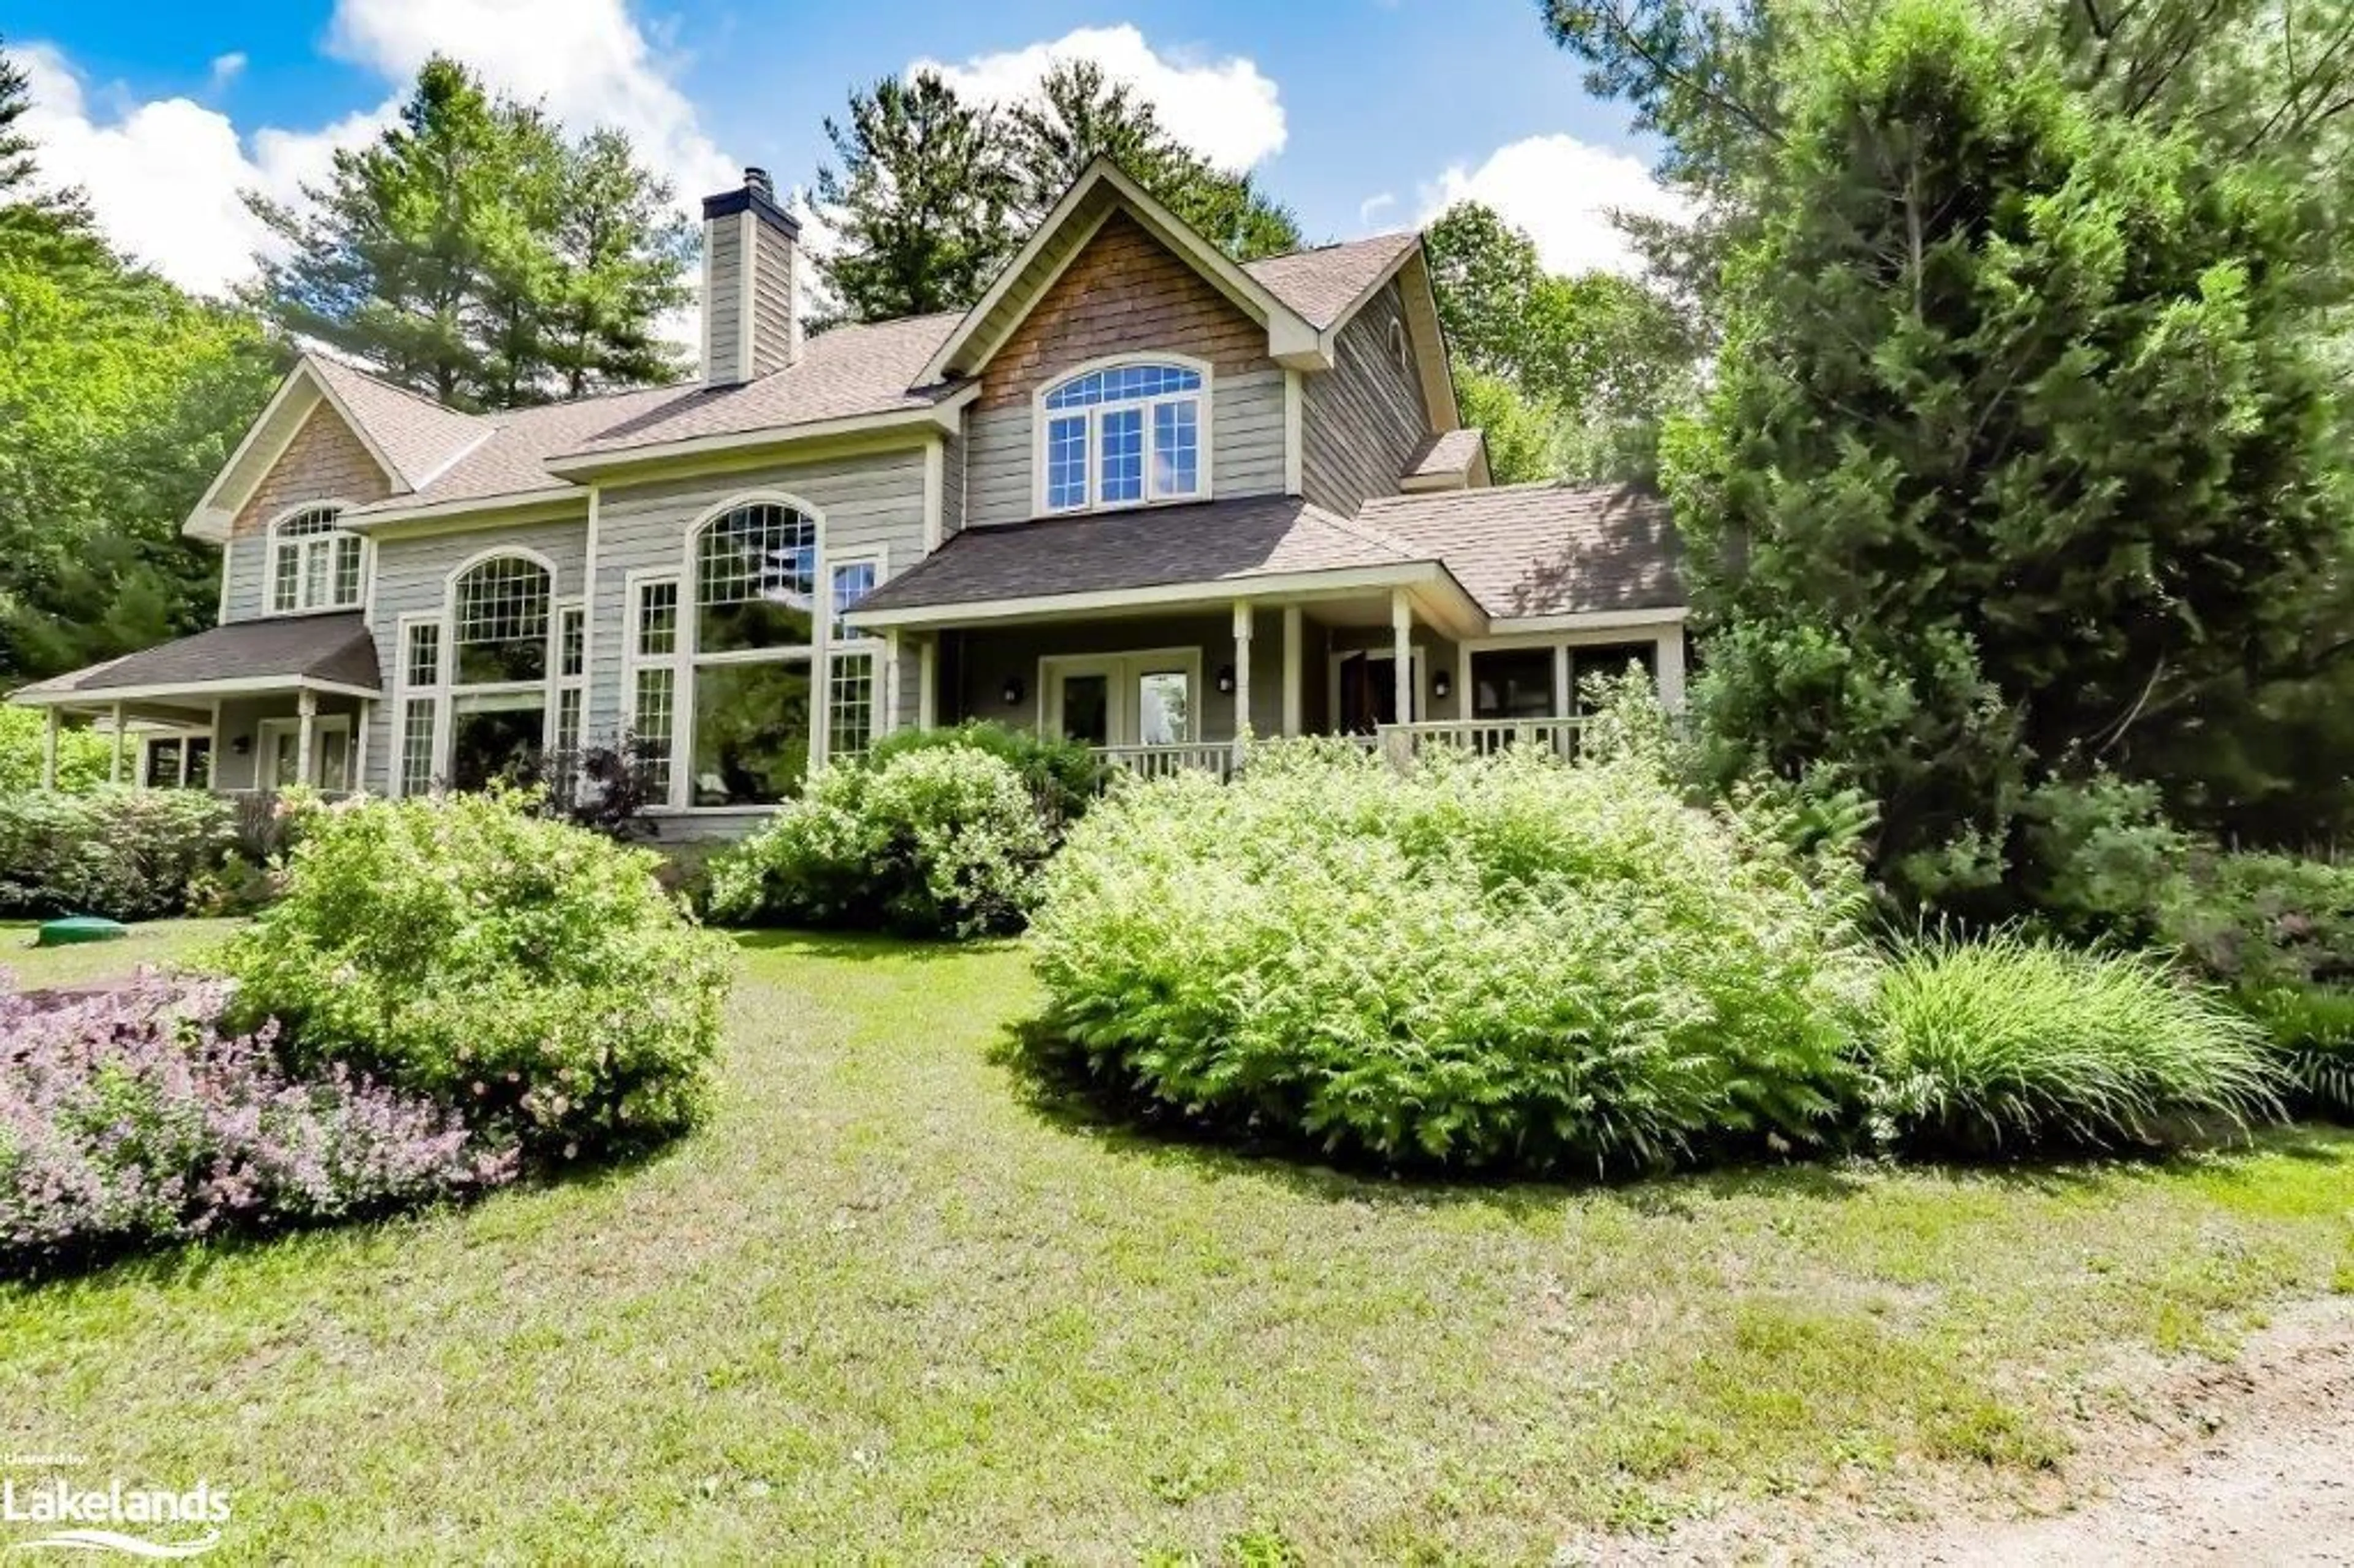 Frontside or backside of a home for 3876 Muskoka Road 118 #Carling 10-W3, Port Carling Ontario P0B 1J0